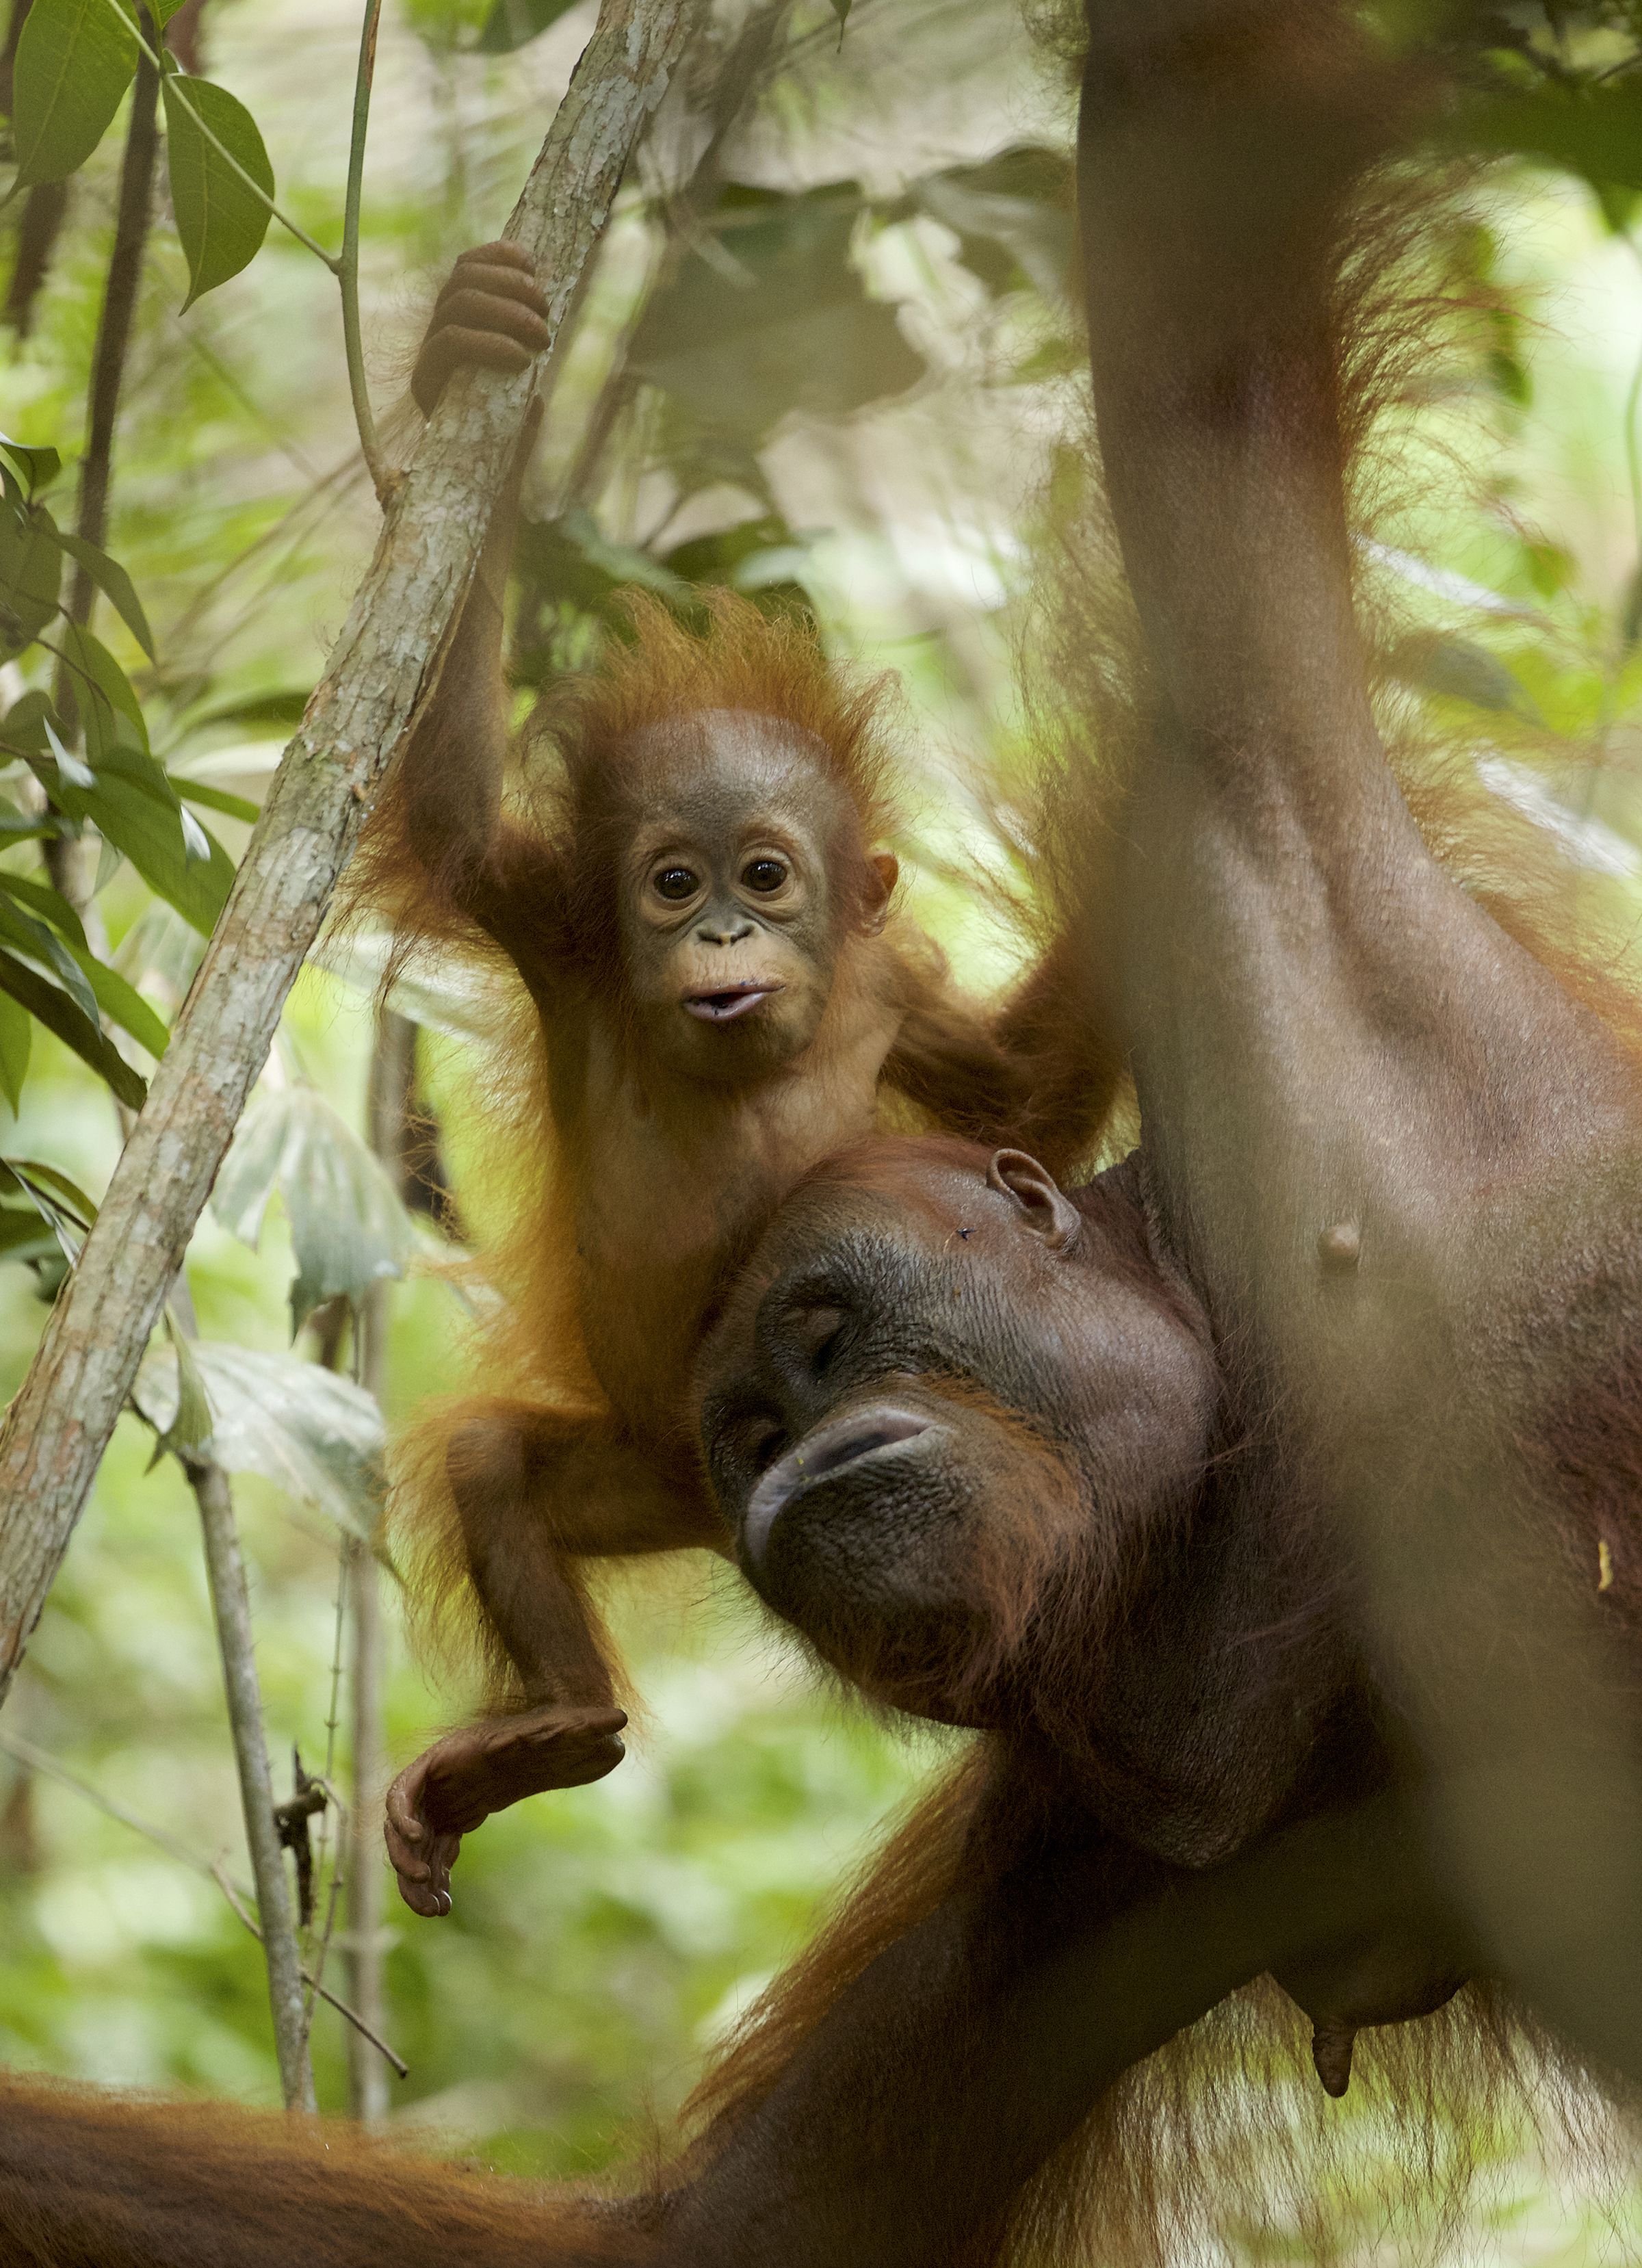 An 11-month-old orangutan and its mom in Borneo.